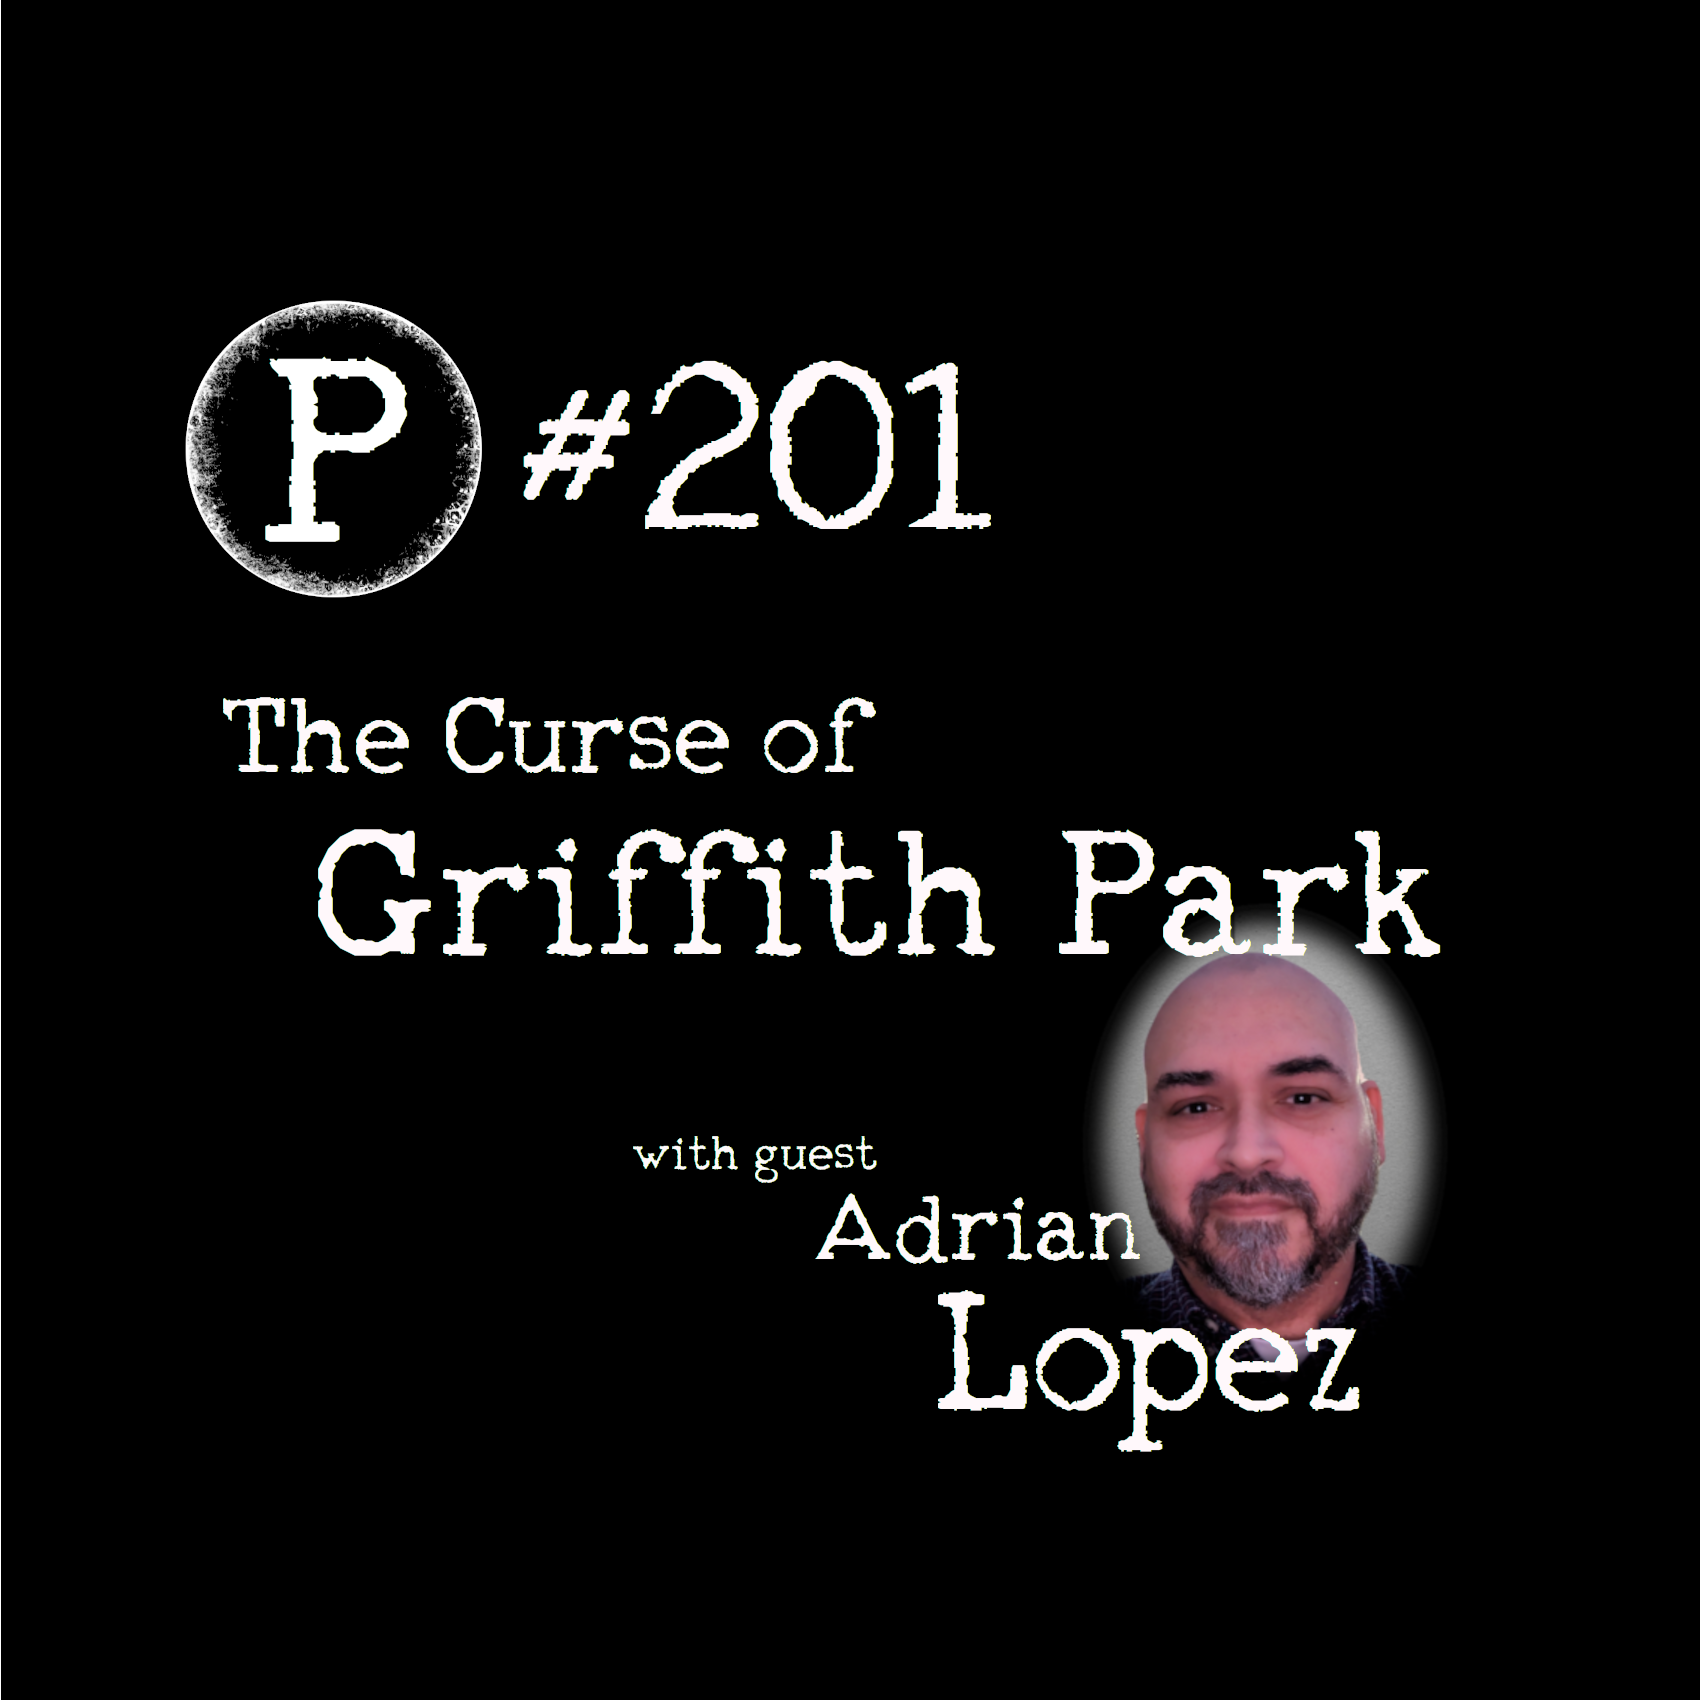 The Curse of Griffith Park with Adrian Lopez